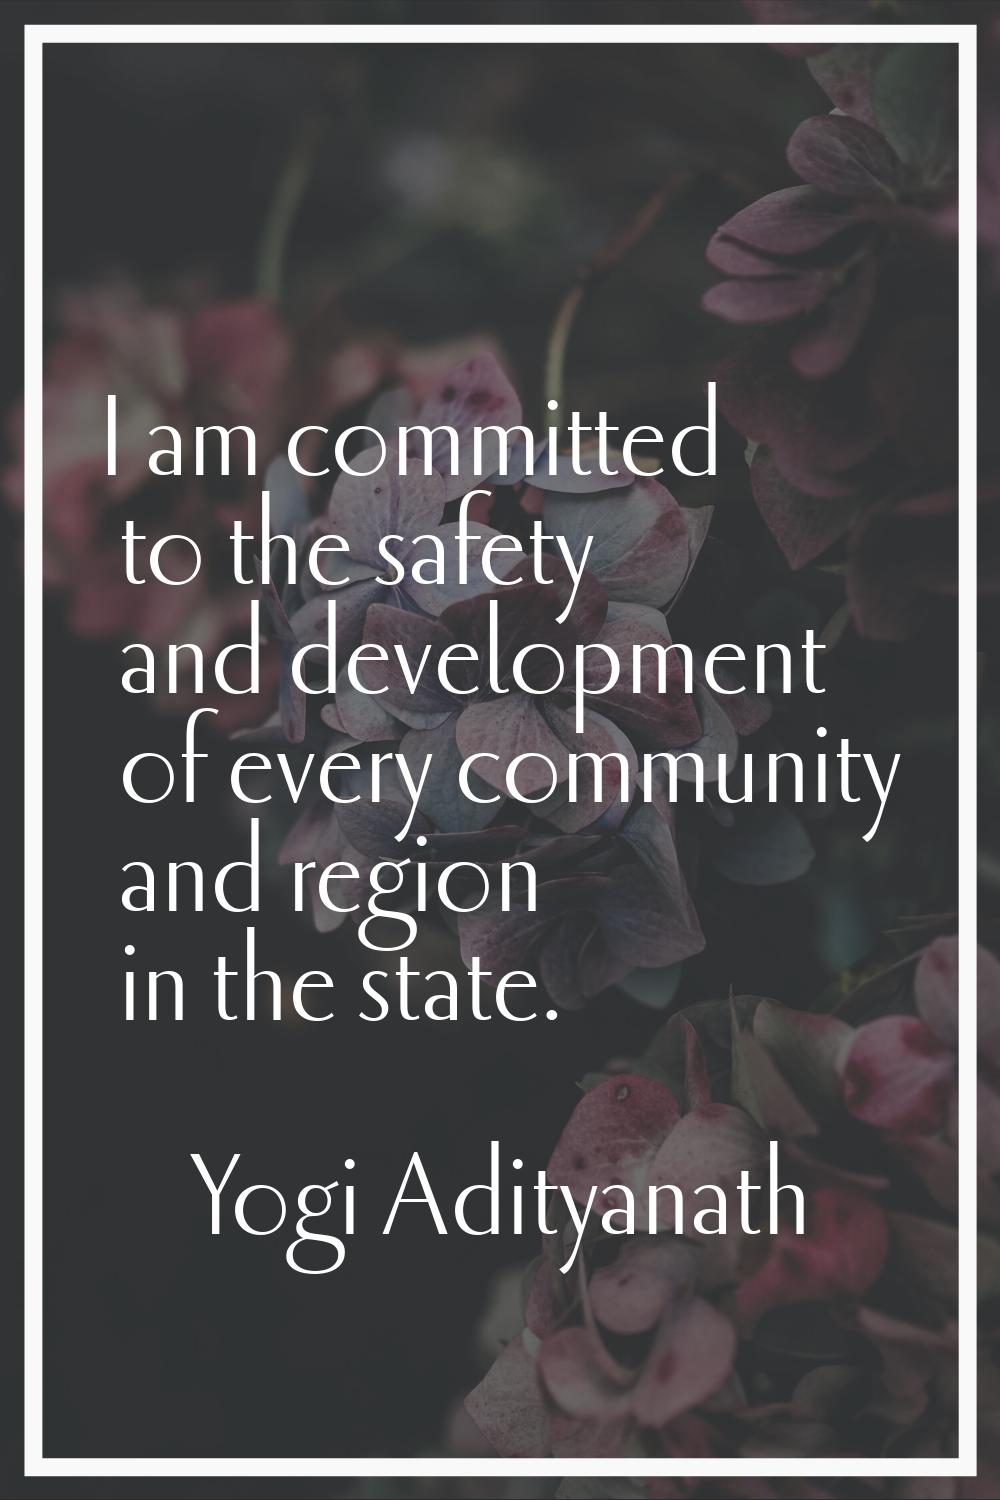 I am committed to the safety and development of every community and region in the state.